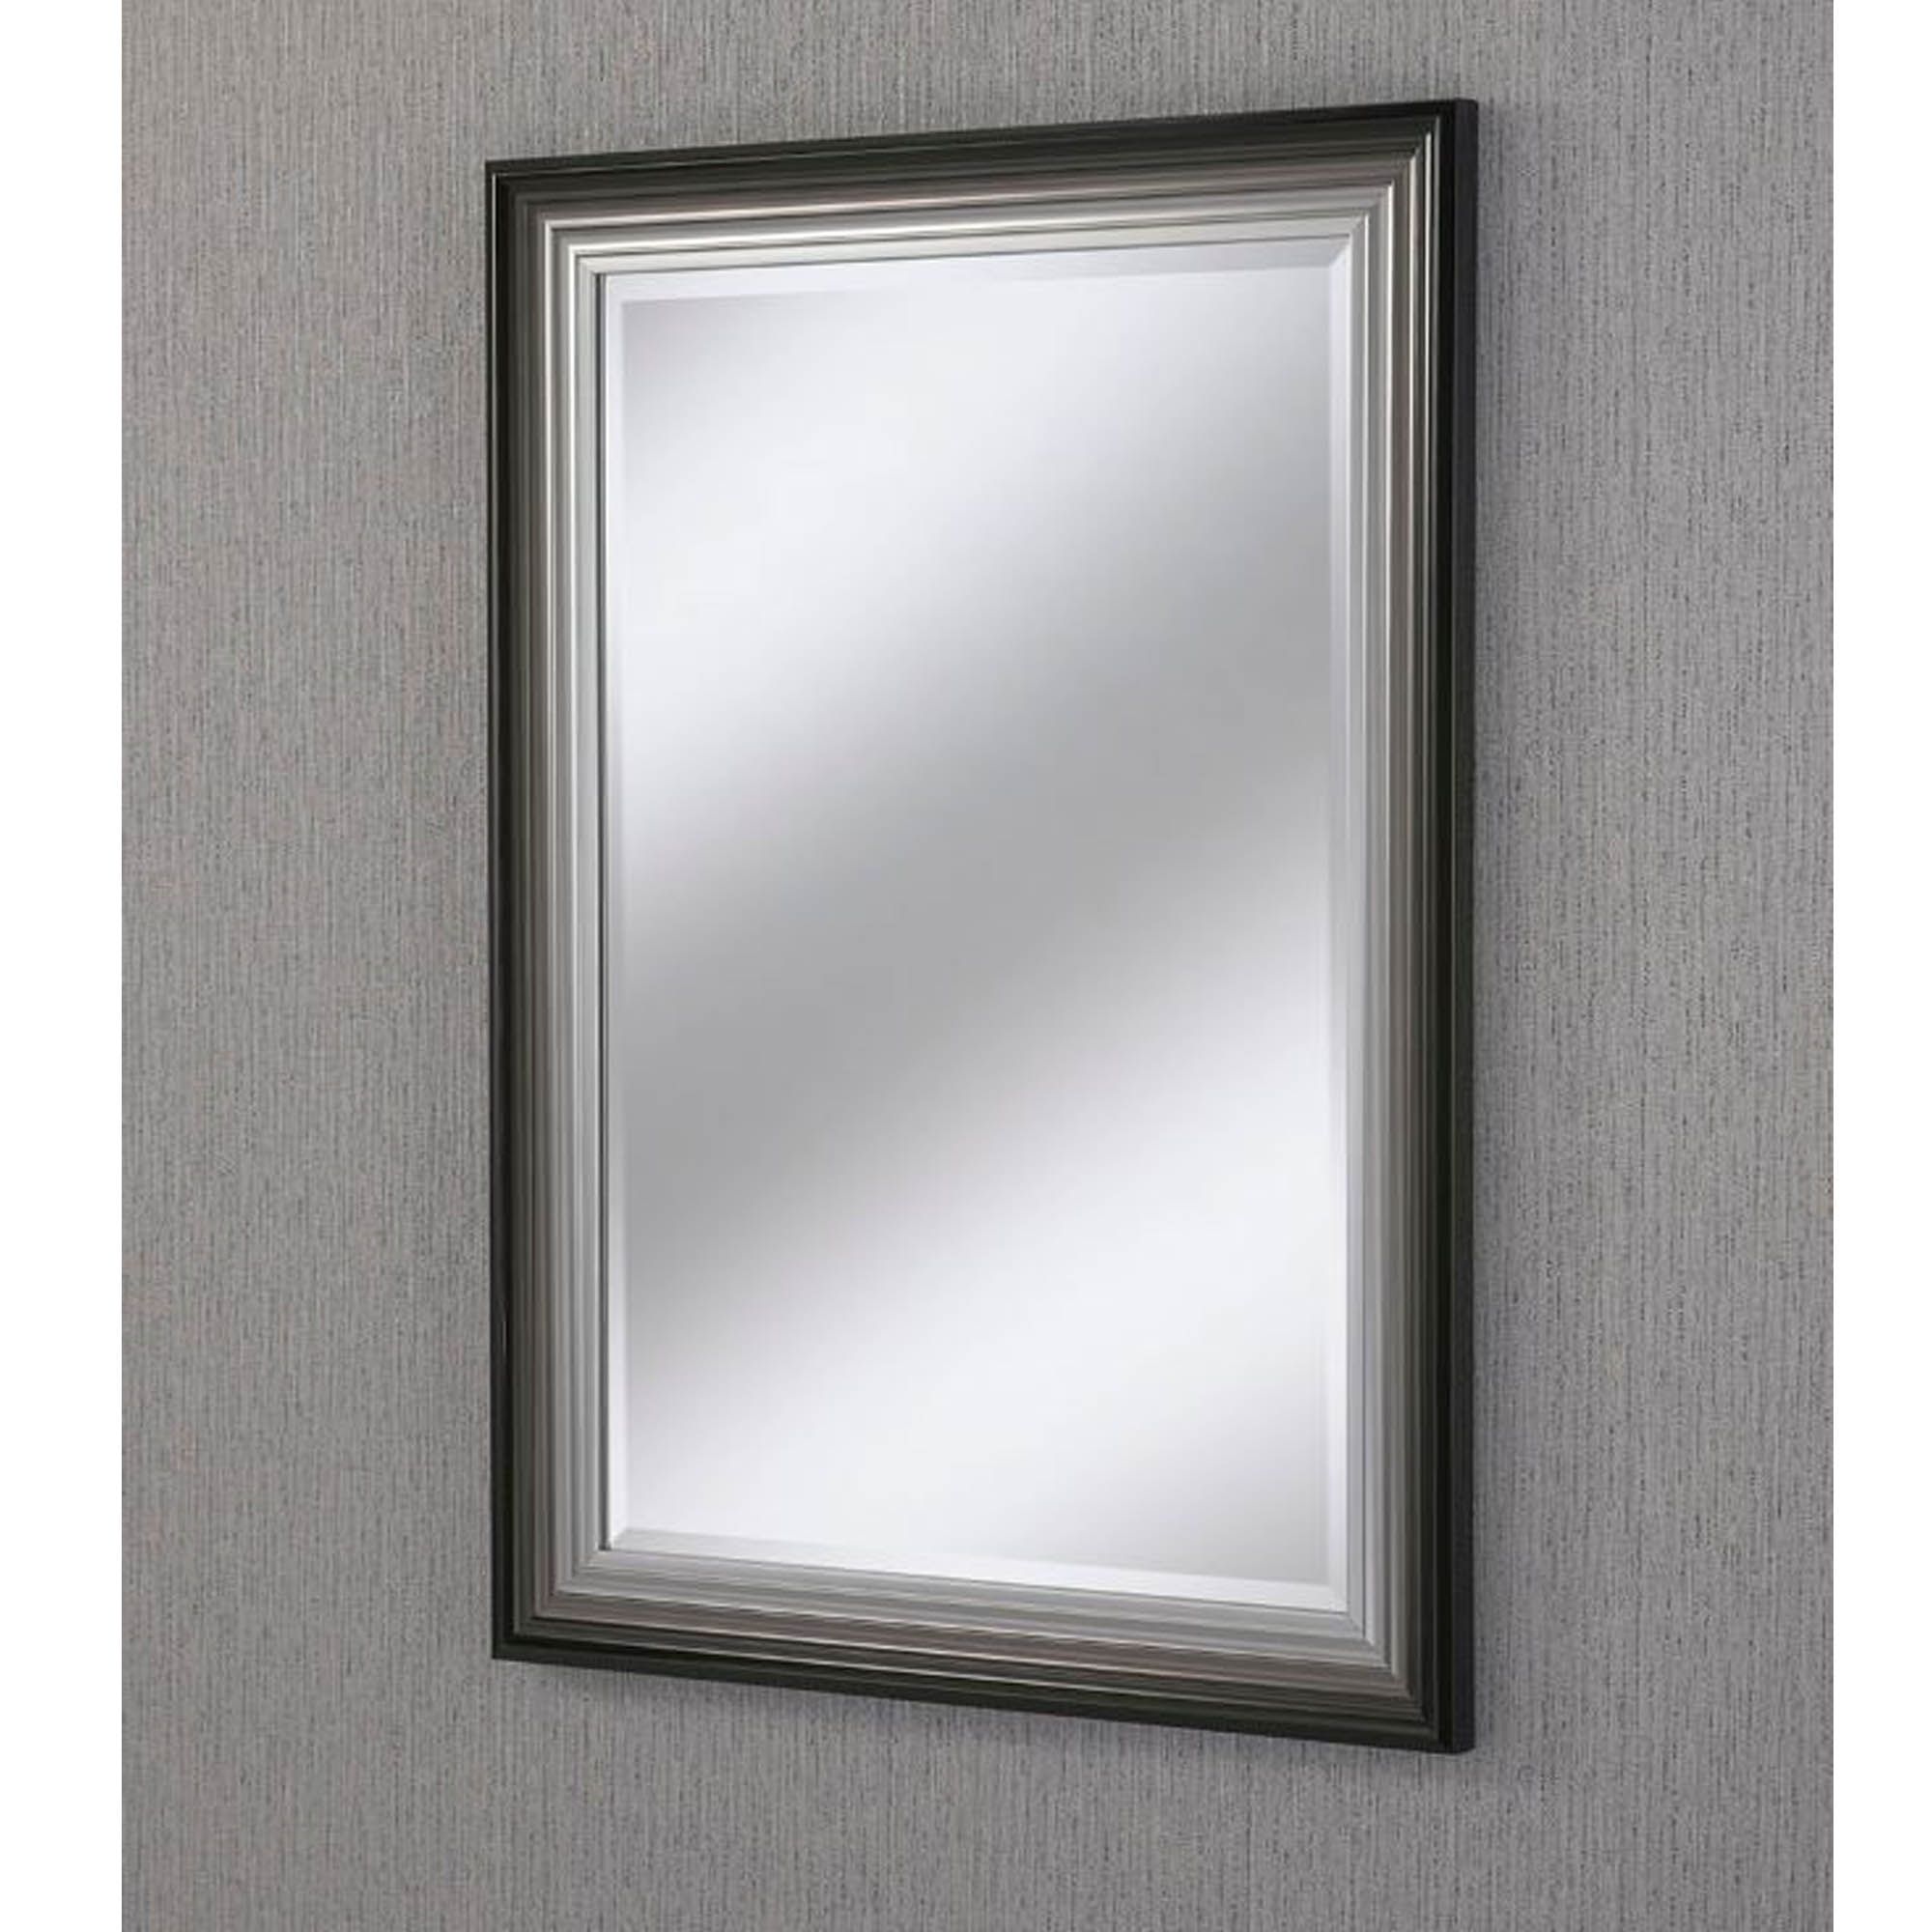 Hd365 In Well Known Black Beaded Rectangular Wall Mirrors (View 14 of 15)